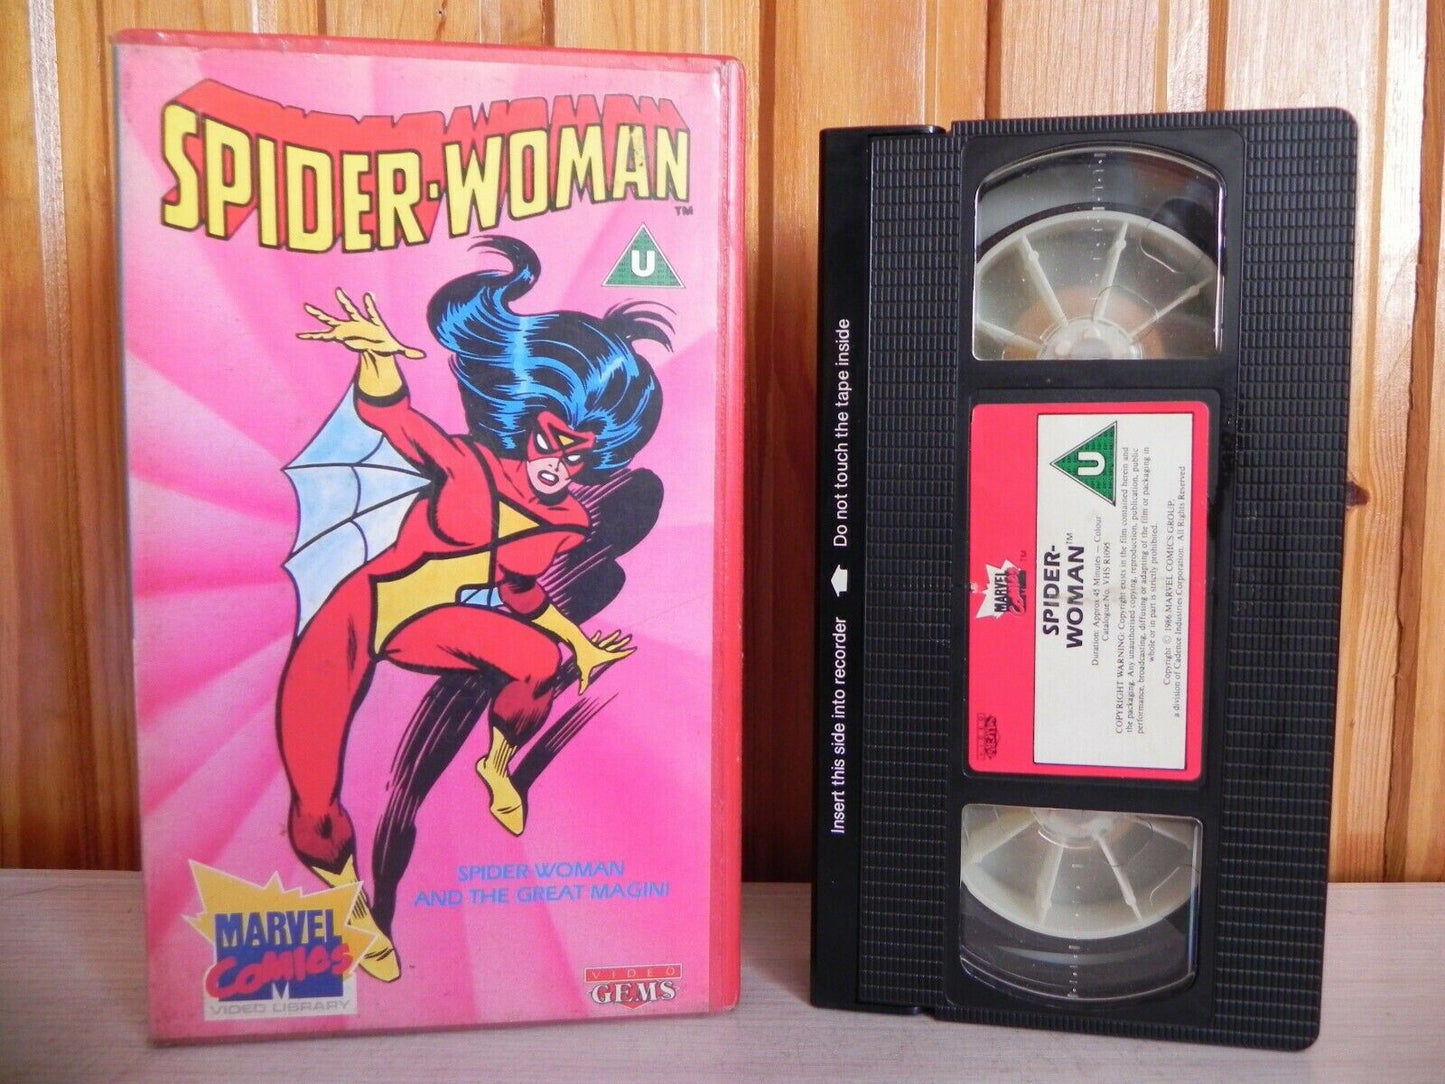 Spider-Woman & The Great Magini - T.V. Series (1979) - Marvel Comics Video - VHS-